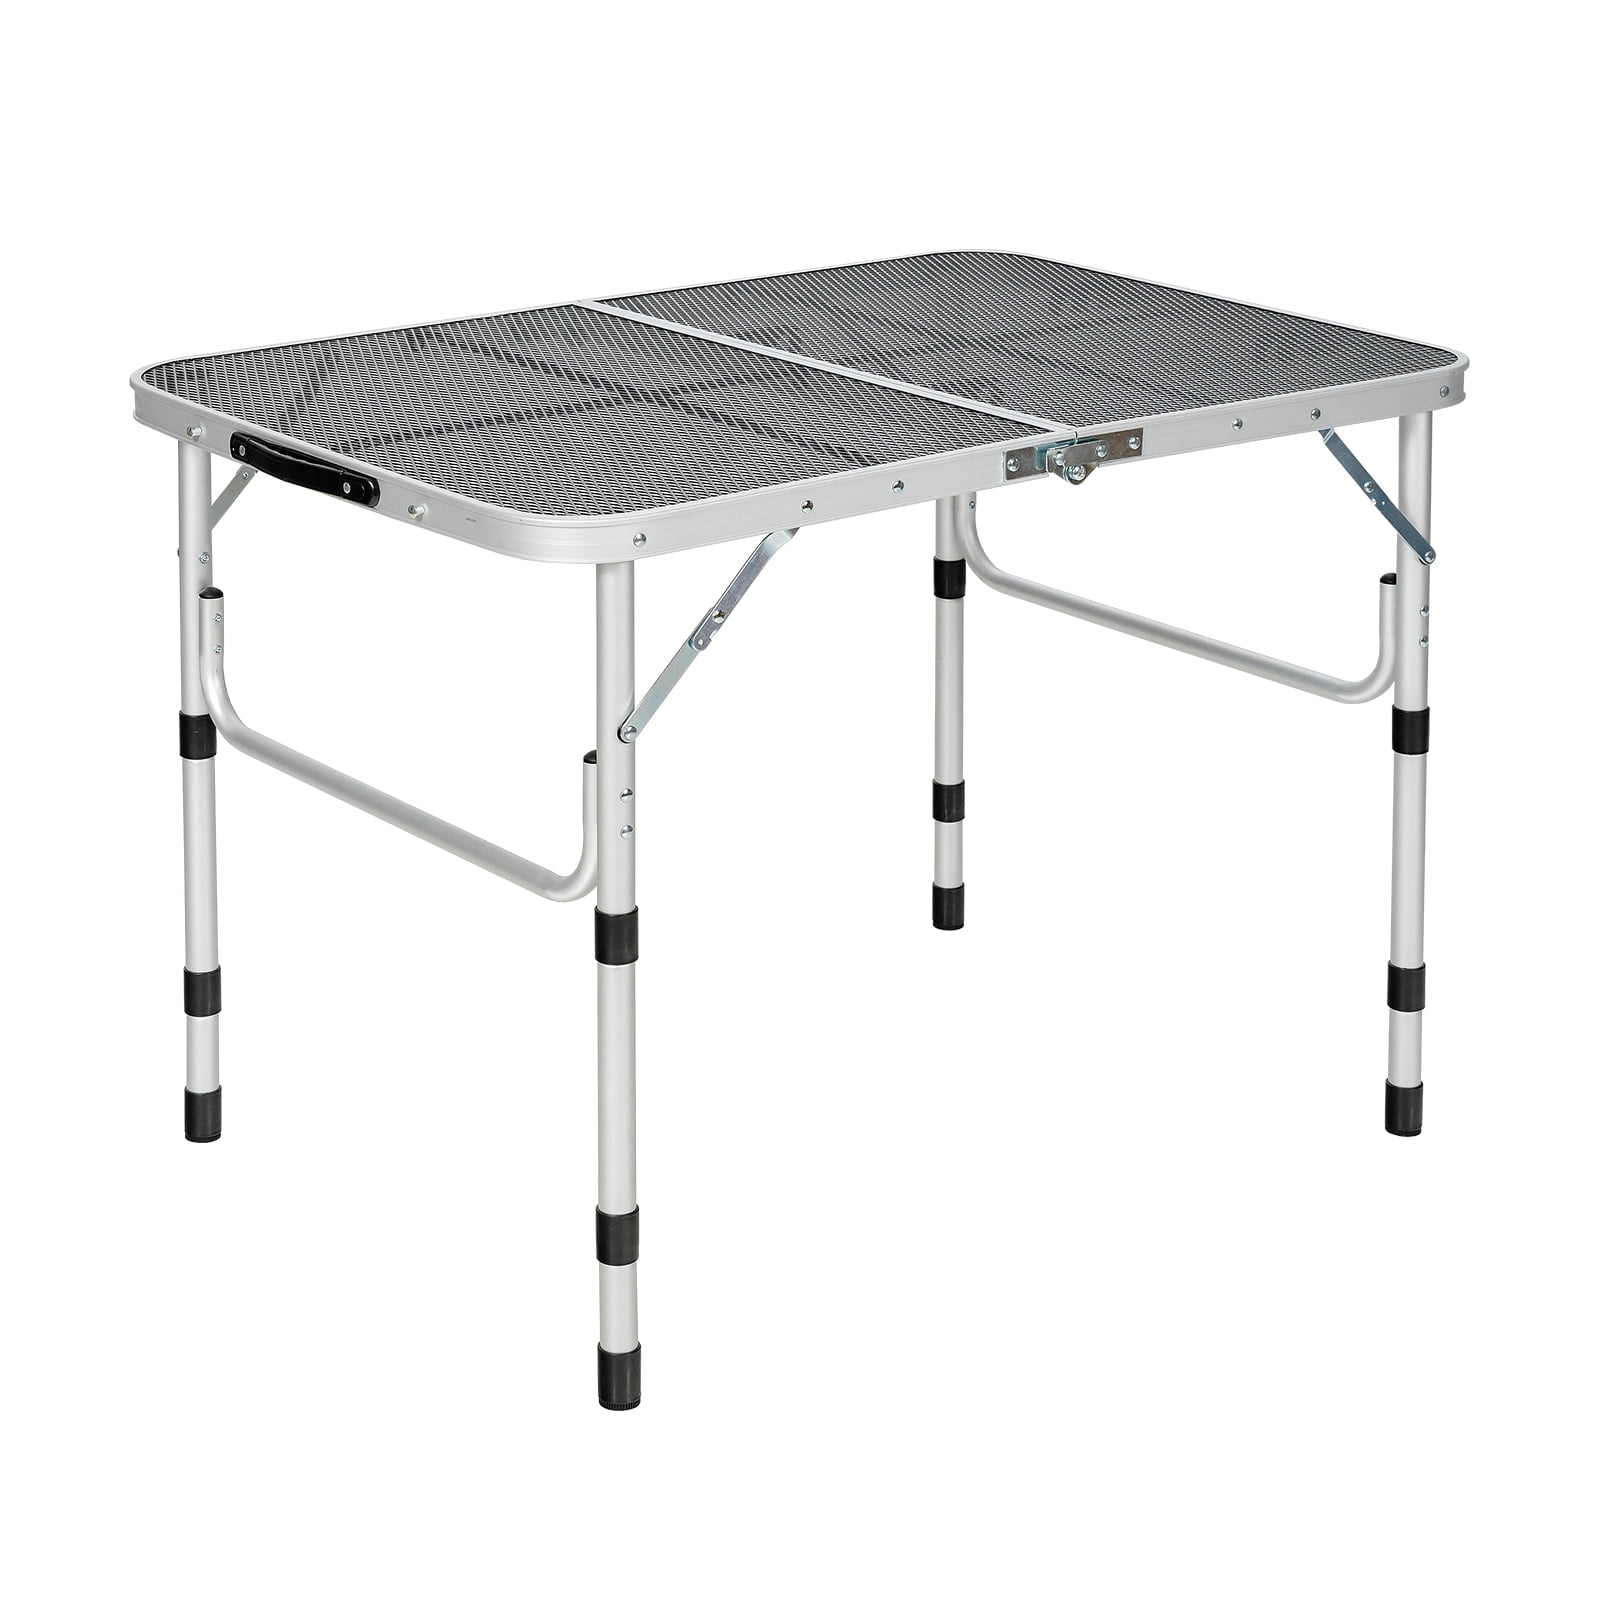  JIONET Folding Portable Grill Table with 37'' Main Tabletop,  Aluminum Quick Set-up, Outdoor Mobile Kitchen Food Prep Station for Picnic  Tailgating RV Backyard (Color : Package 1) : Sports & Outdoors